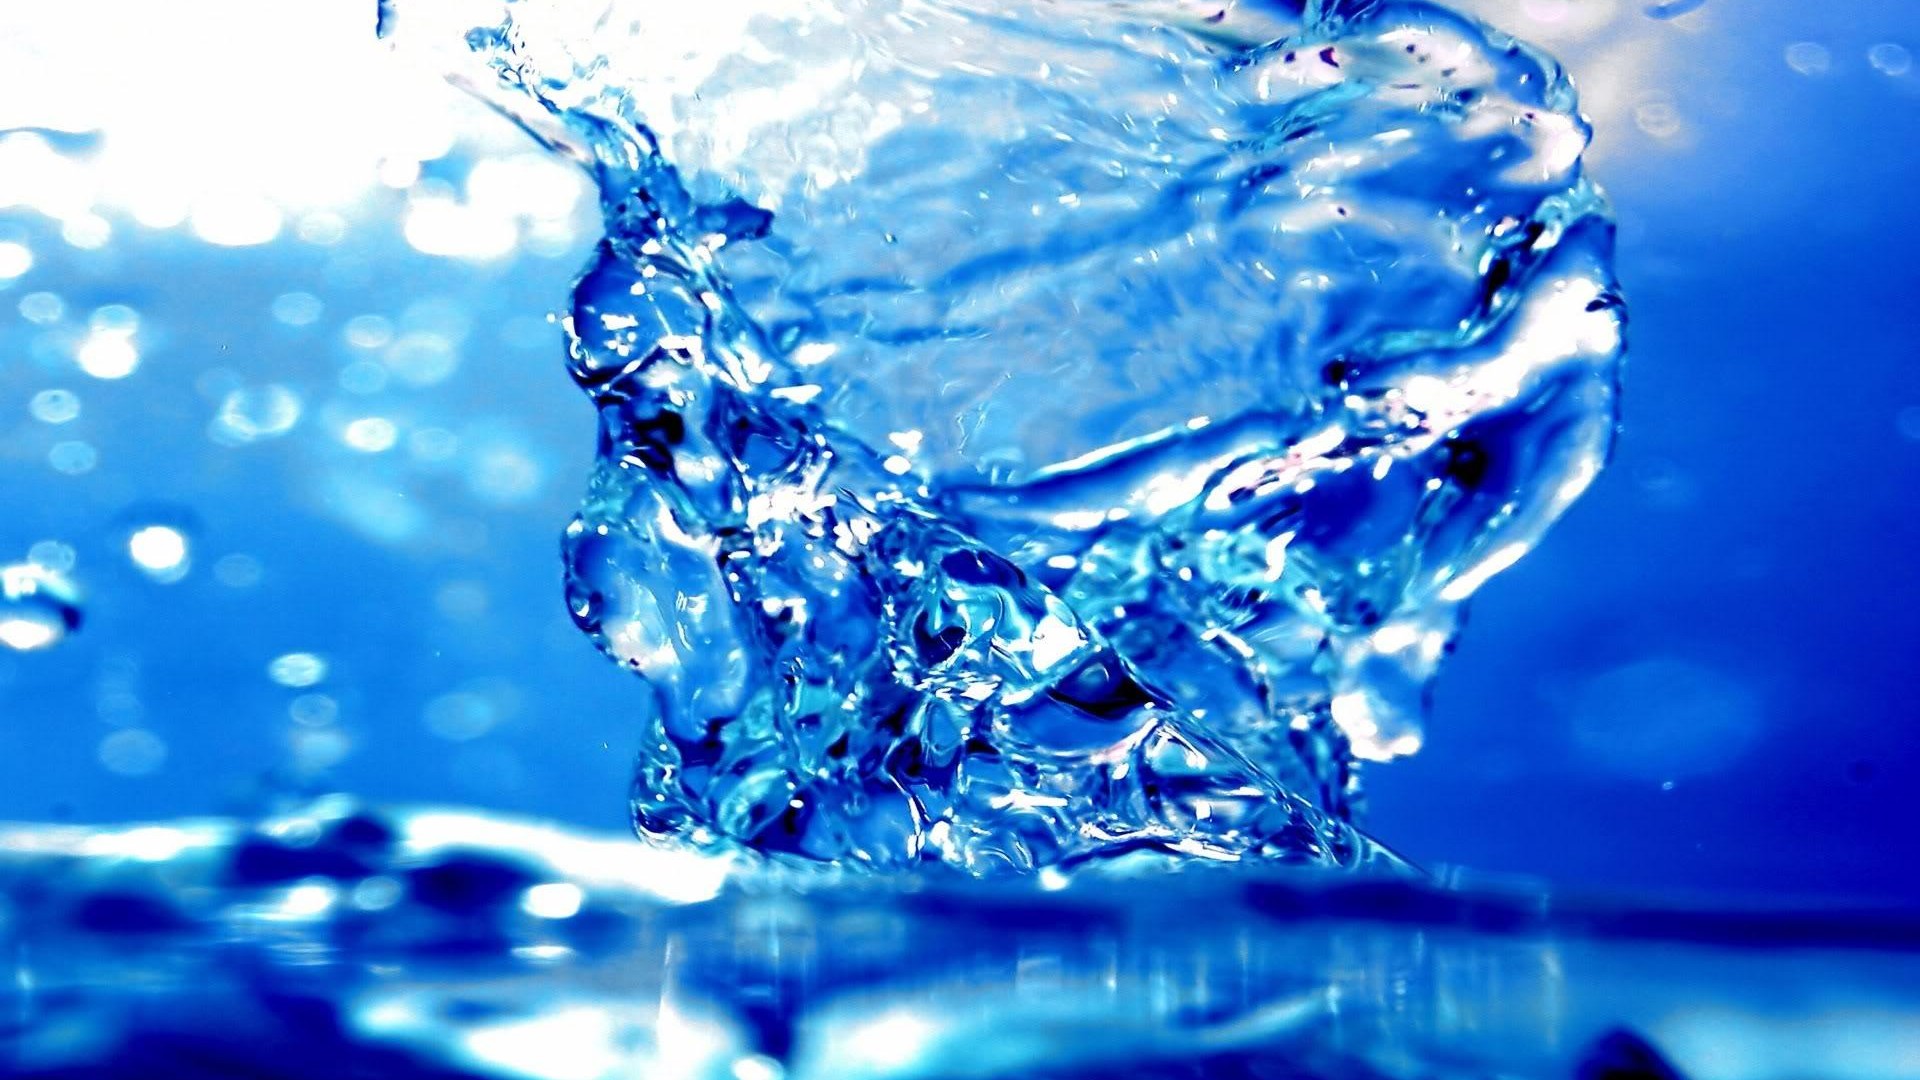 Abstract Water Background 1 28157 HD Images Wallpapers